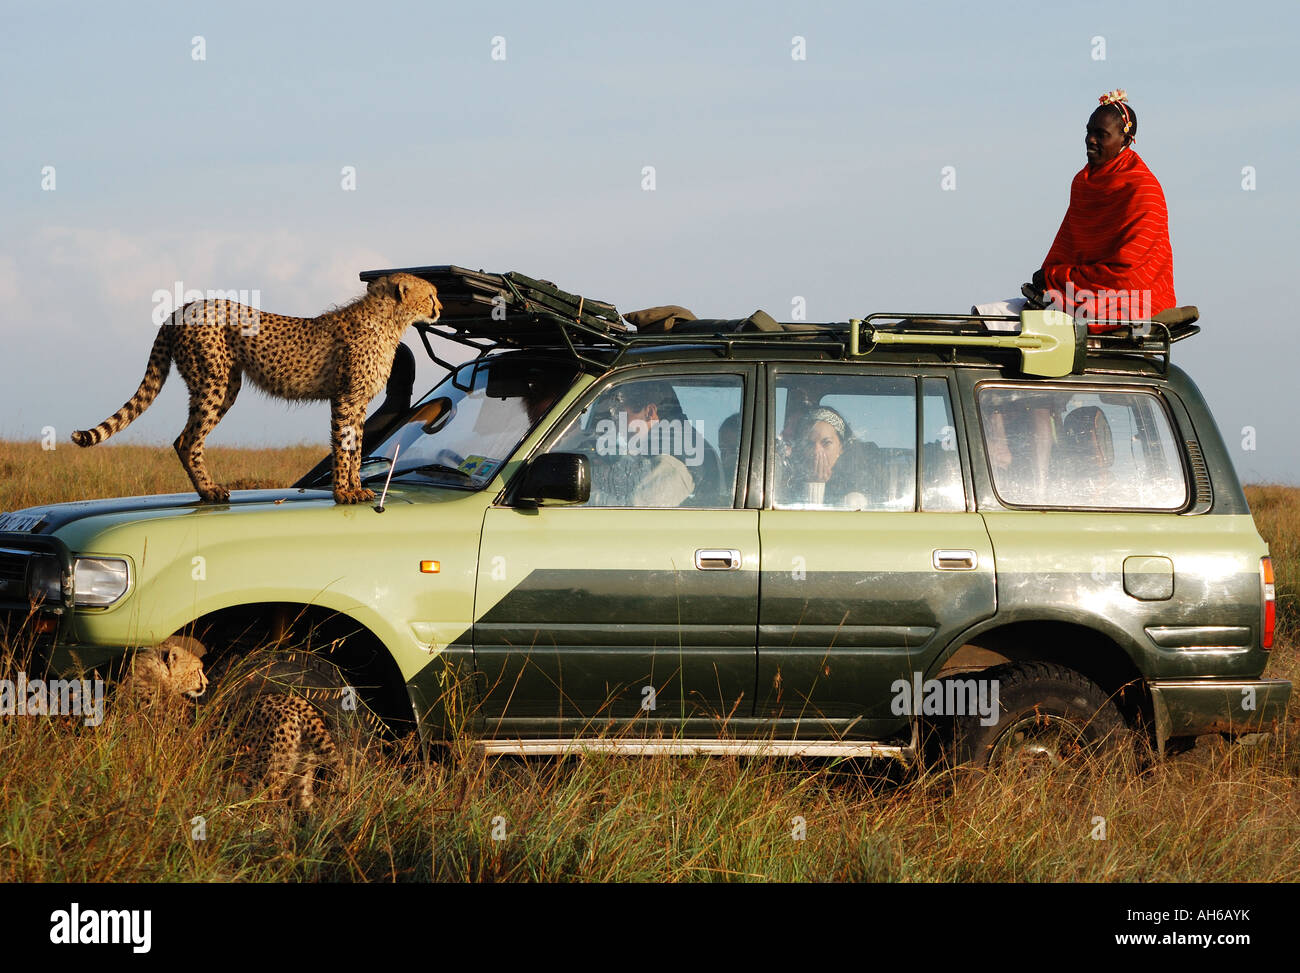 A young cheetah stands on a vehicle and meets a Masai warrior man in the Masai Mara National Reserve Kenya East Africa Stock Photo